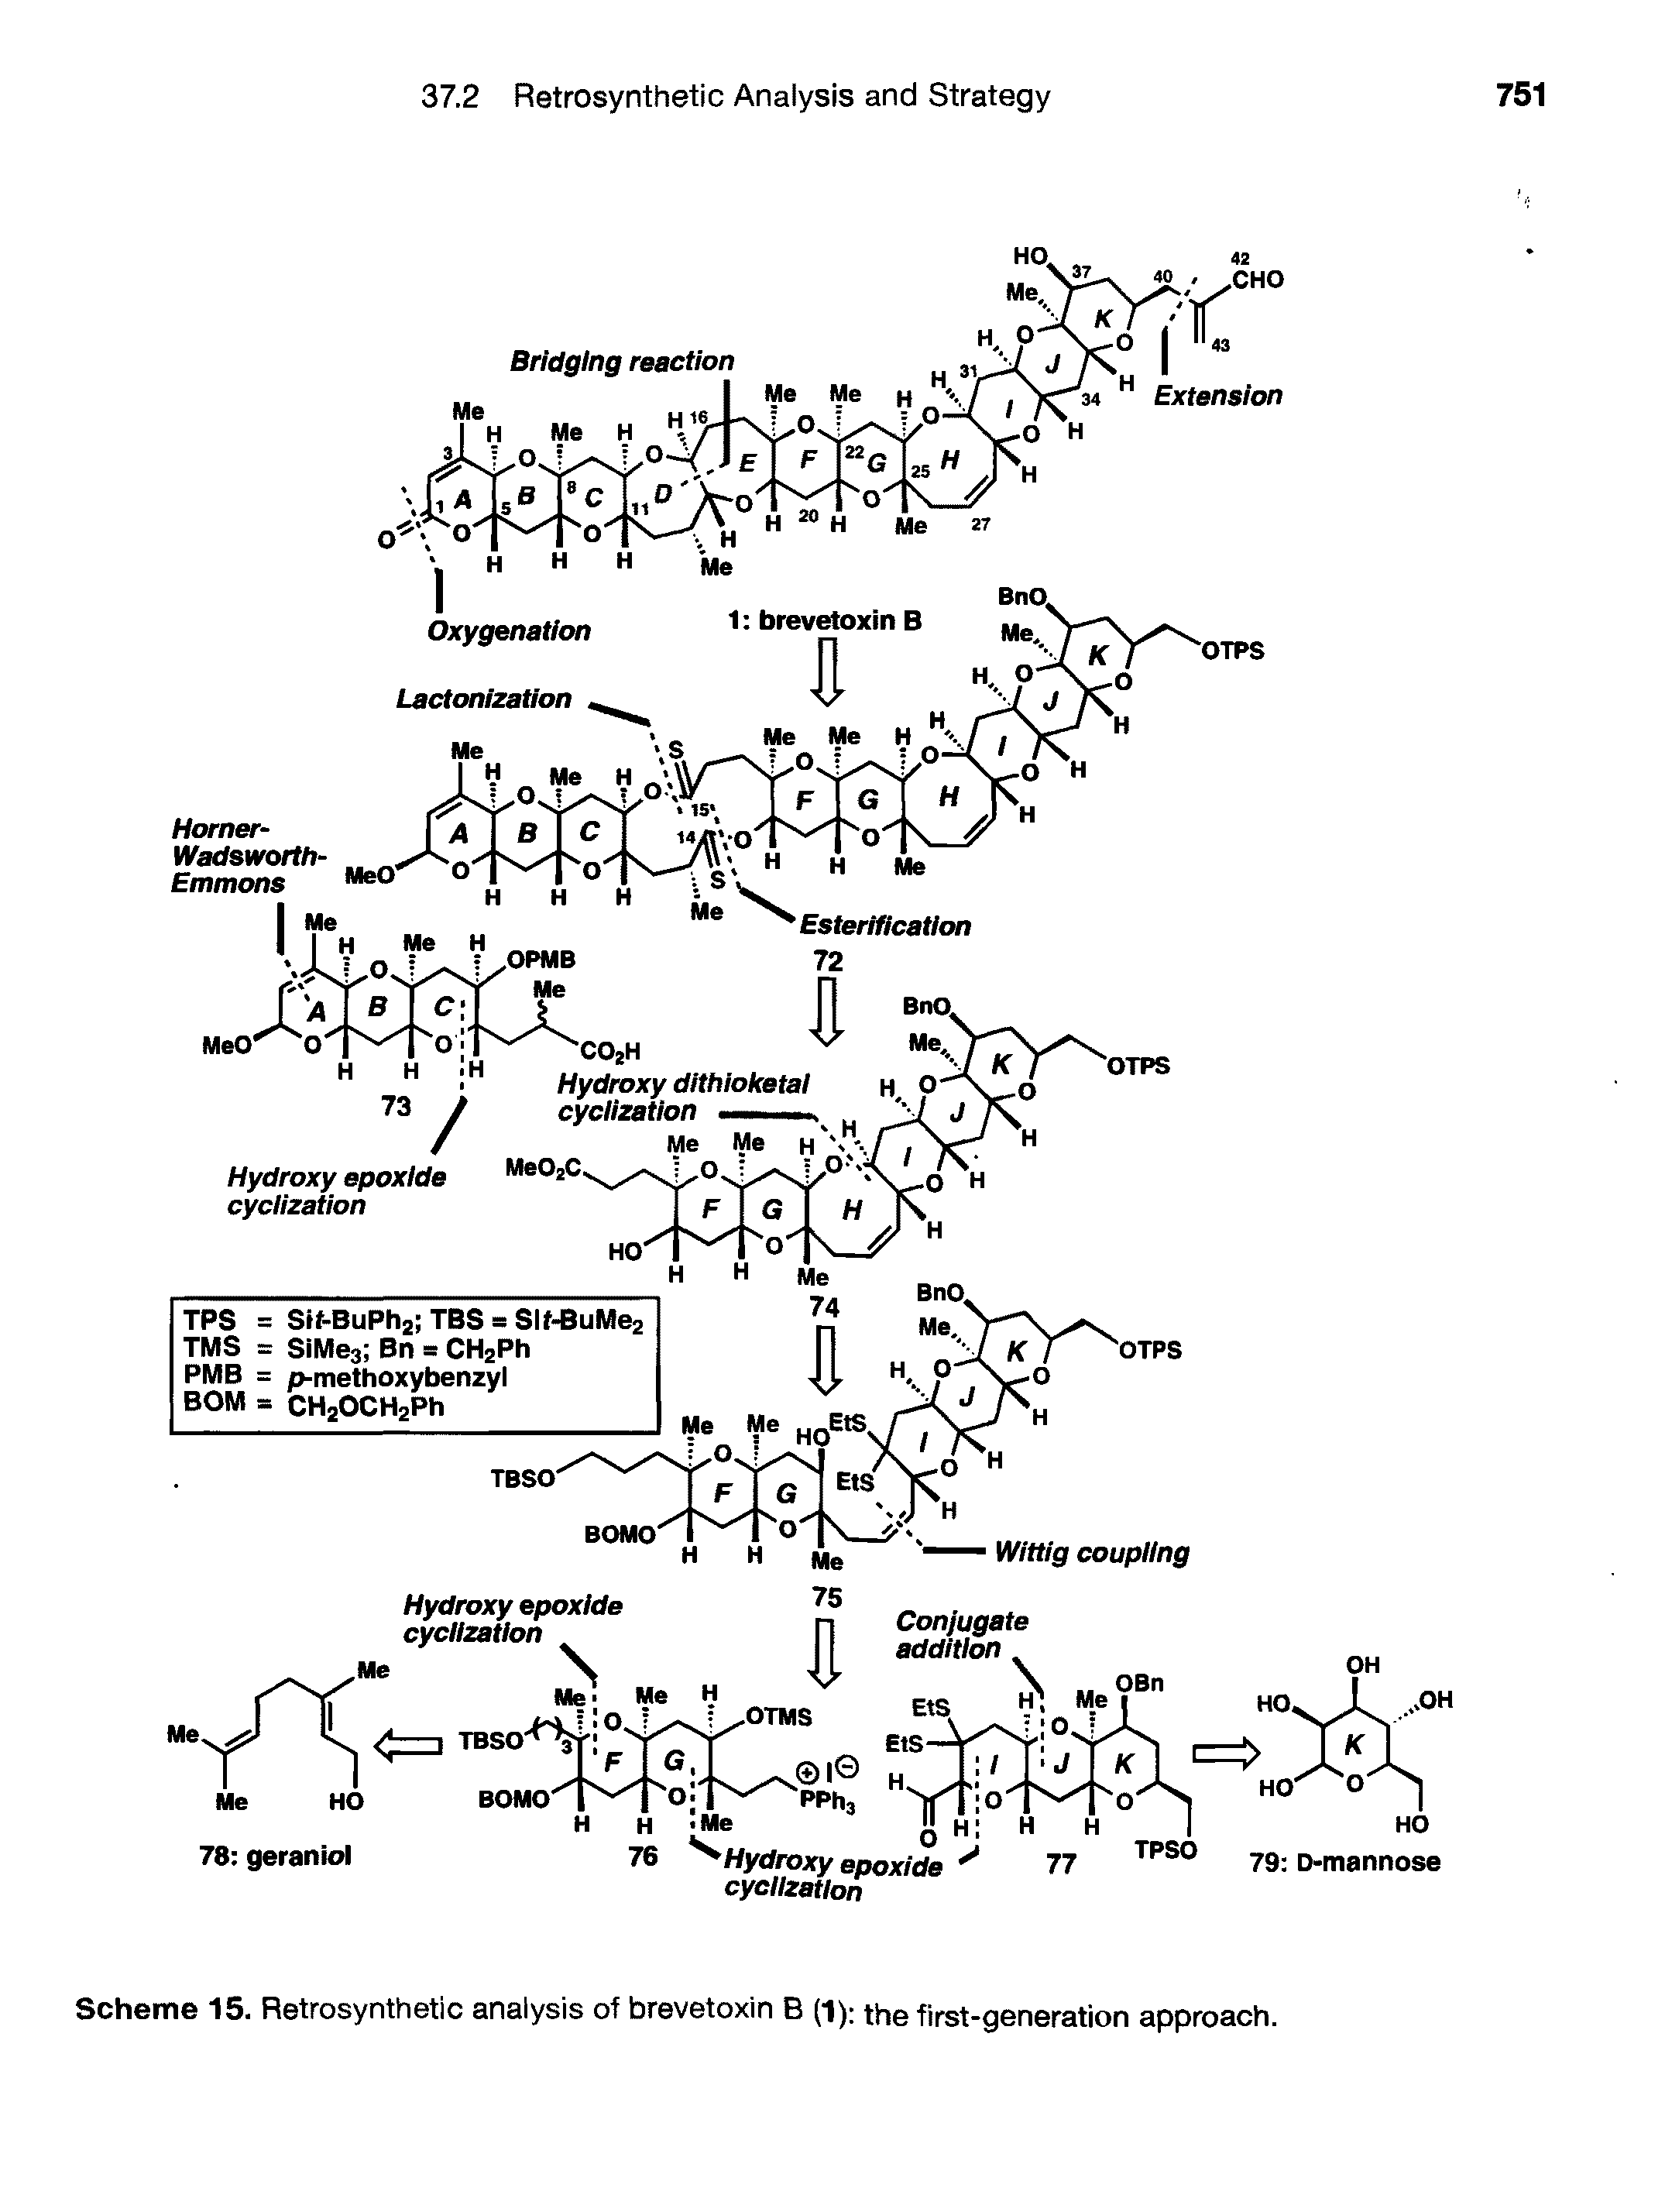 Scheme 15. Retrosynthetic analysis of brevetoxin B (1) the first-generation approach.